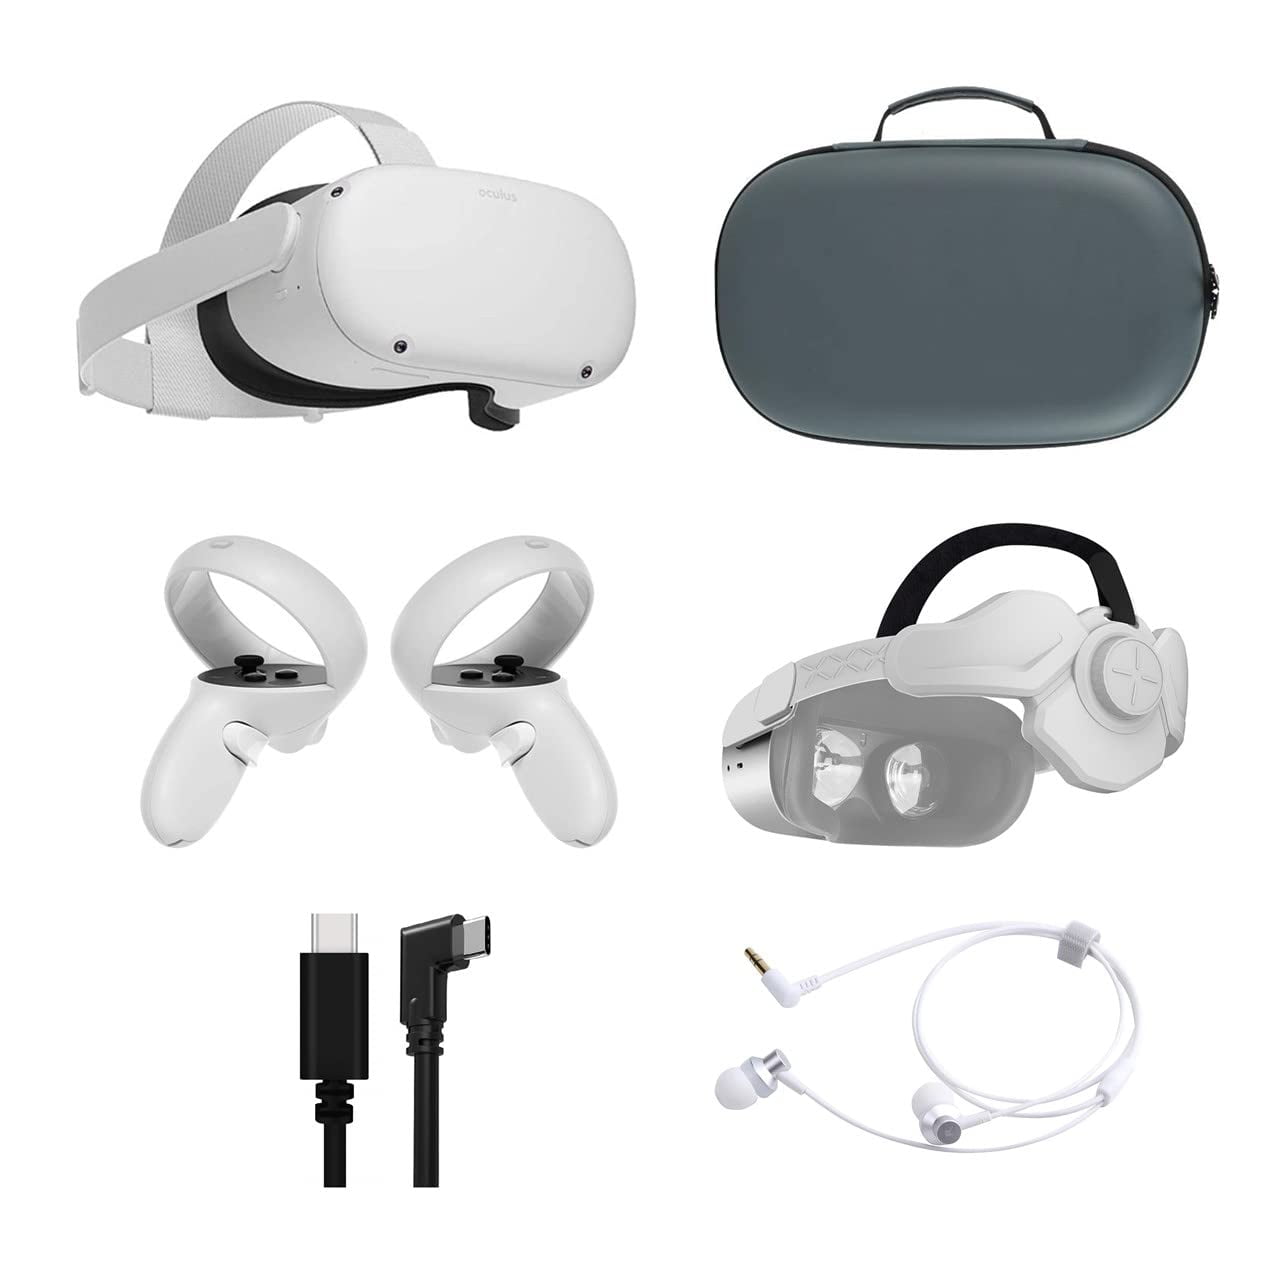 Have a bath alarm confusion 2021 Oculus Quest 2 All-In-One VR Headset, Touch Controllers, 128GB SSD,  Glasses Compatible, 3D Audio, Mytrix Head Strap, Carrying Case, Earphone,  Link Cable (3M) - Walmart.com